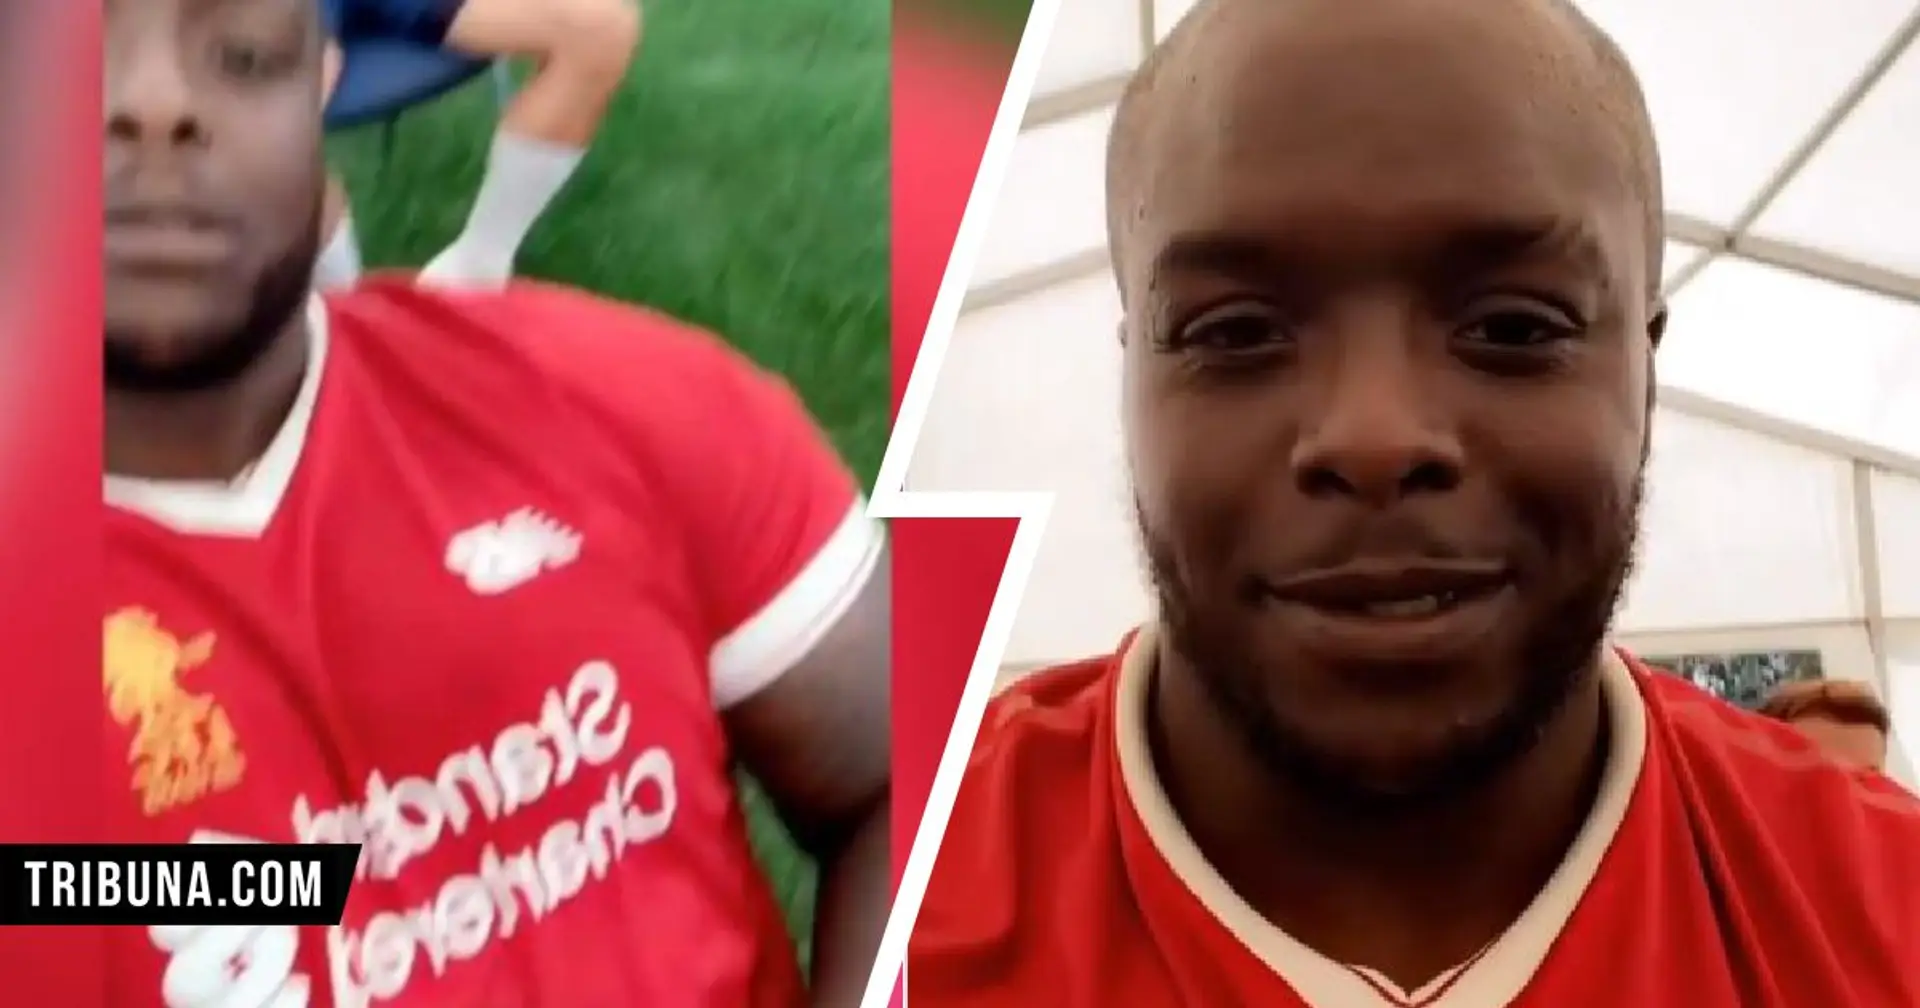 Reds fan Adebayo 'The Beast' Akinfenwa fined by Wycombe for wearing Liverpool shirt to training